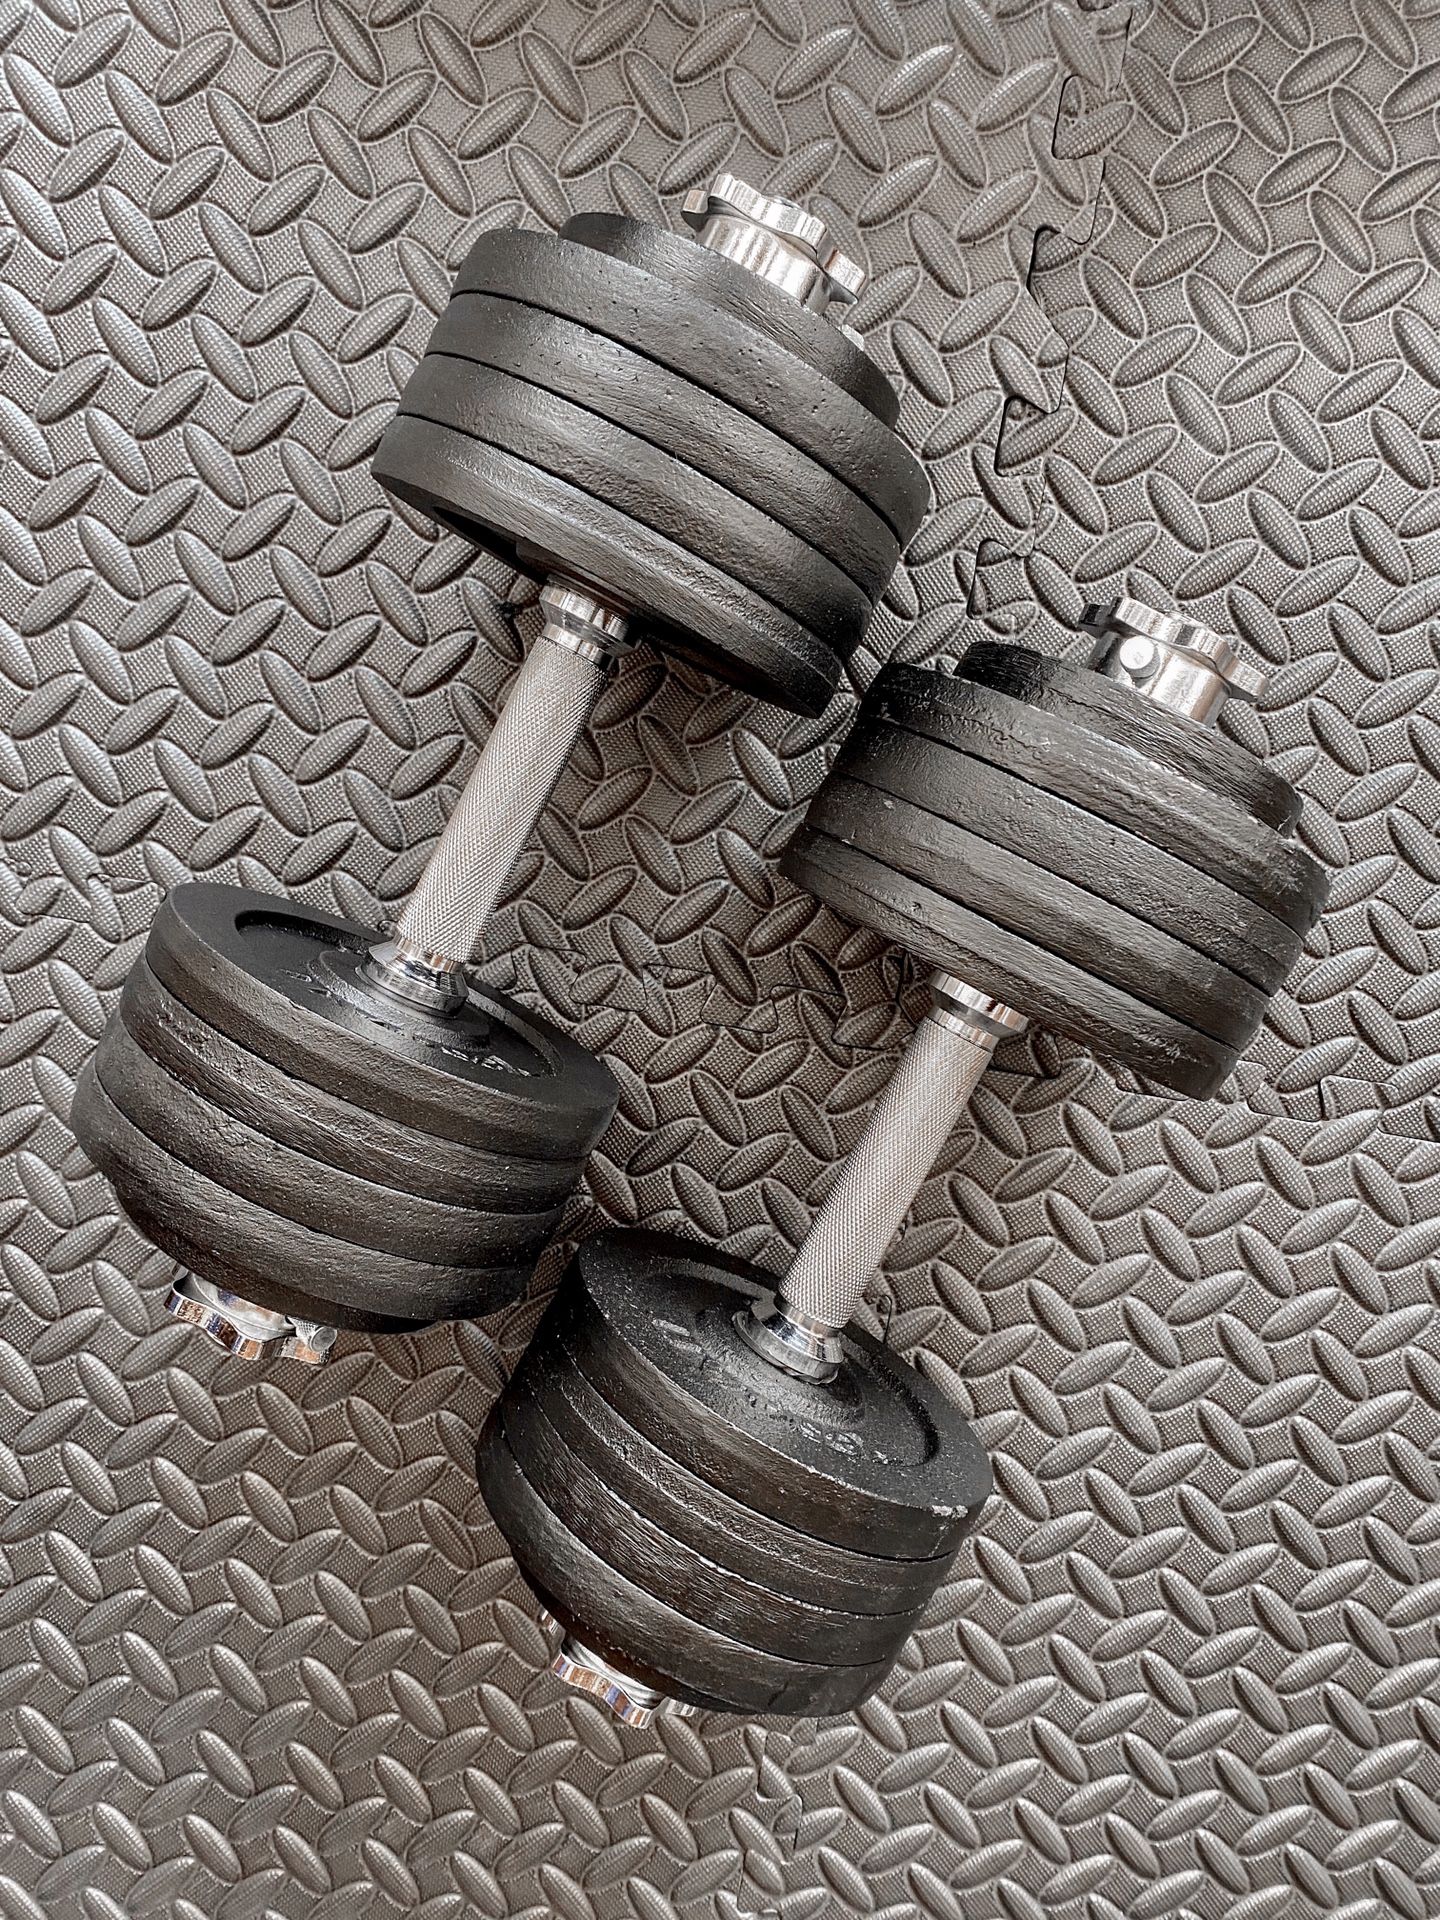 Brand new in box 105 lb (52.5x2u) pair adjustable dumbbells All Solid Steel (not negotiable)